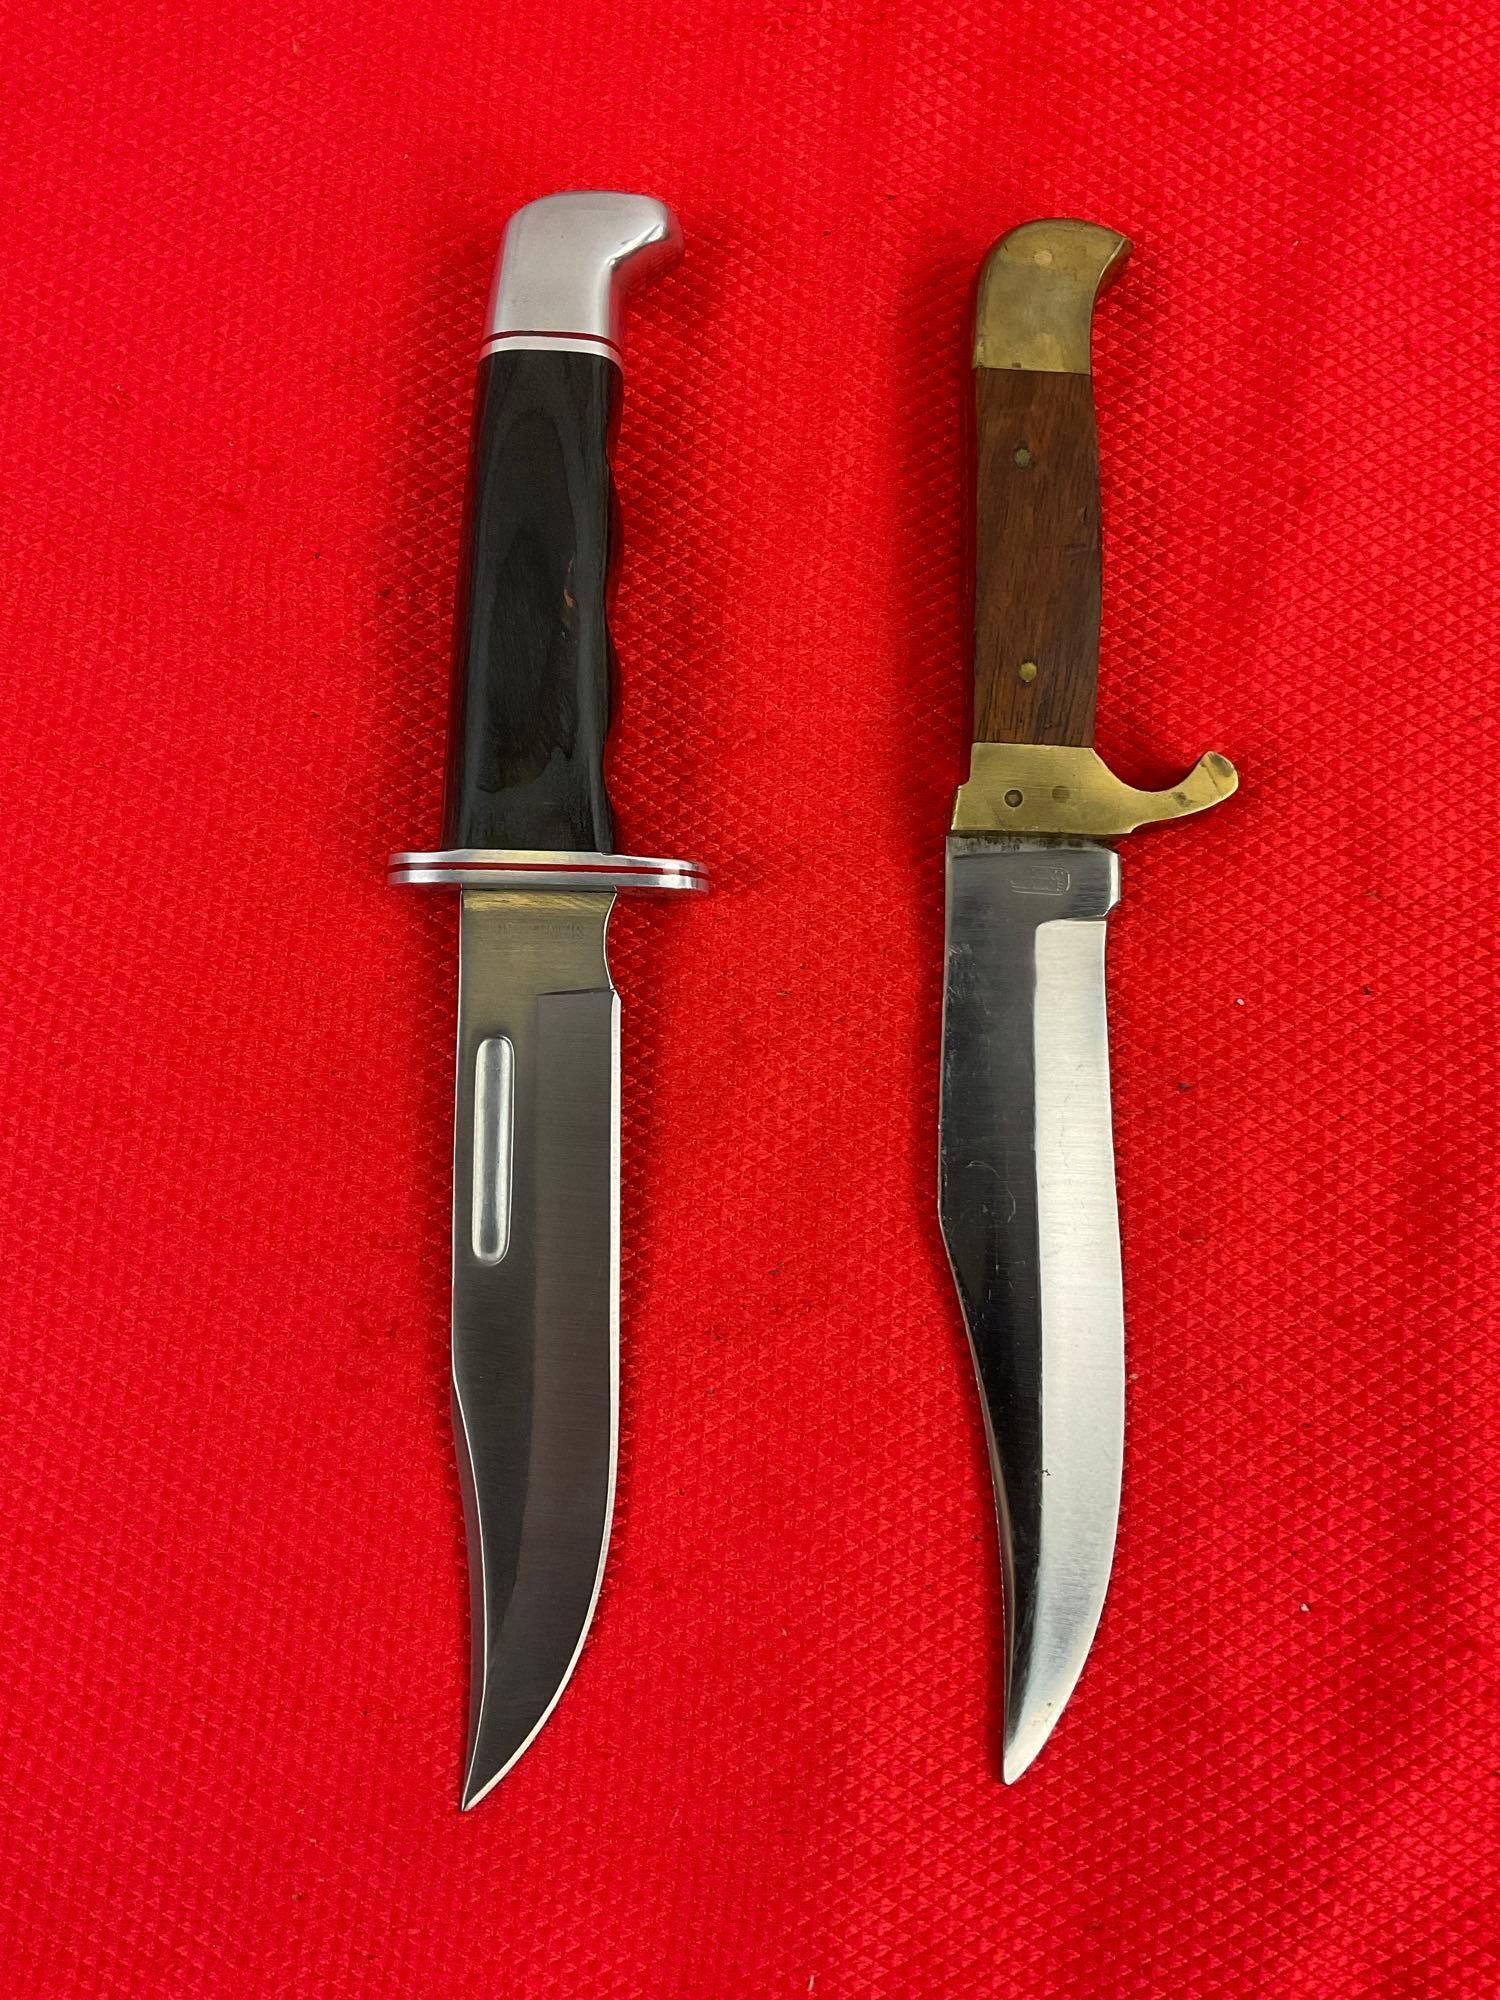 2 pcs 5" Steel Fixed Blade Bowie Knives w/ Sheathes. Unknown Makers & Models. See pics.